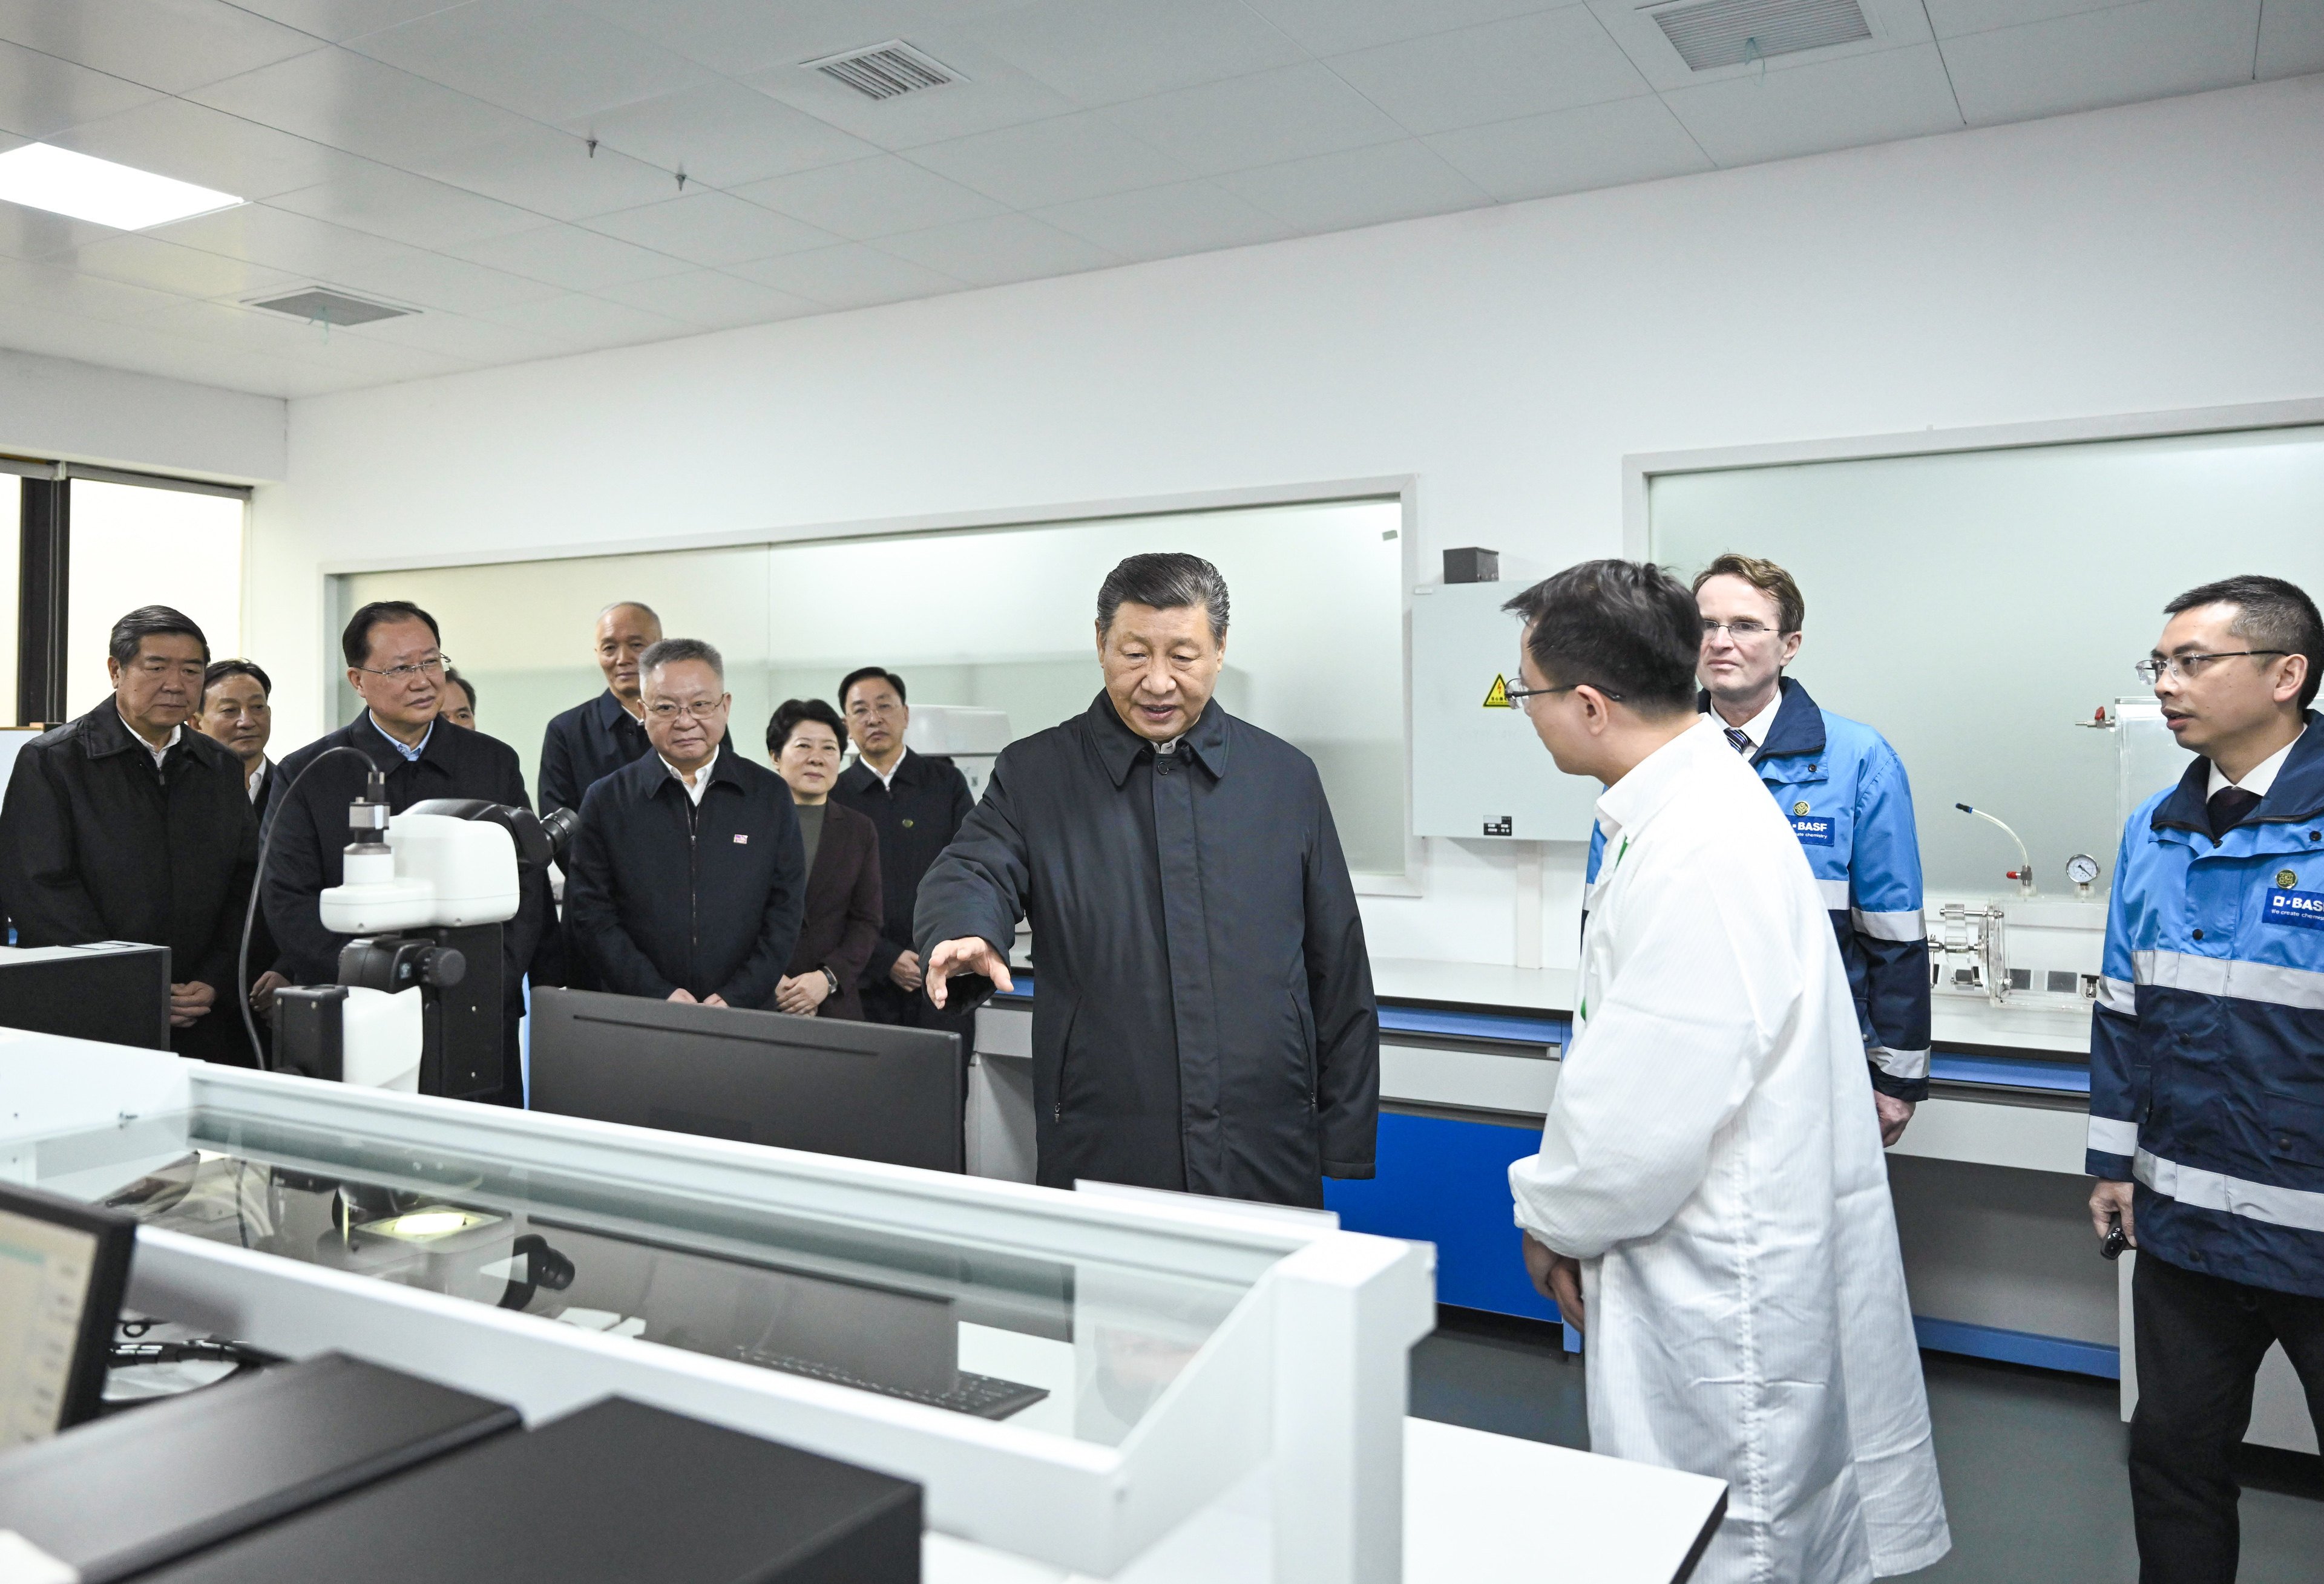 President Xi Jinping visits a battery materials joint venture in Changsha, central China’s Hunan province. Photo: Xinhua